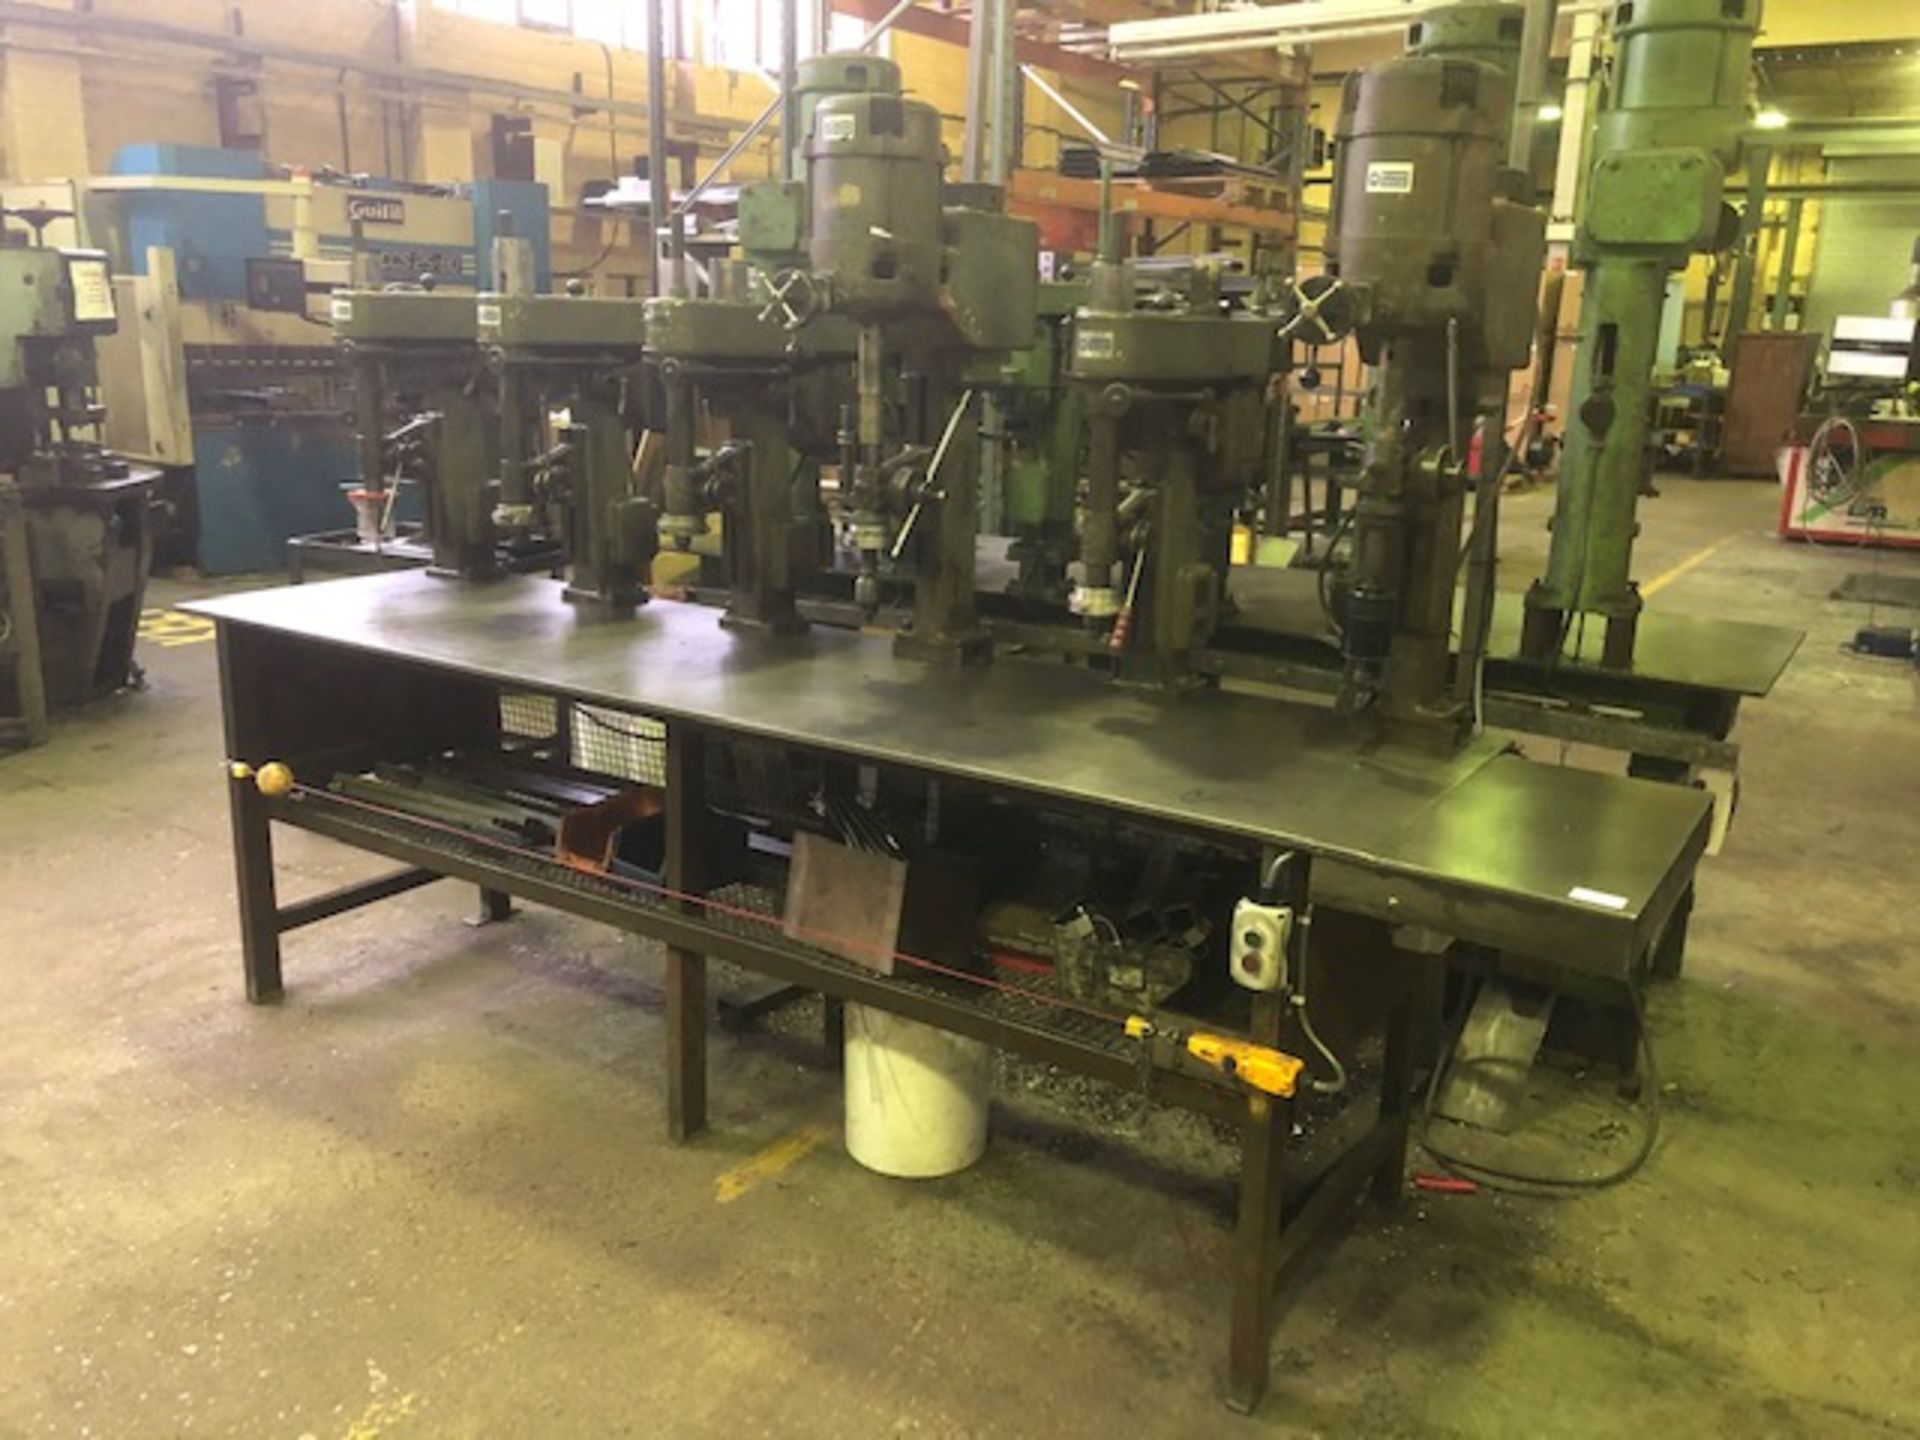 Steel drill bench with 6 overhead pillar drill units